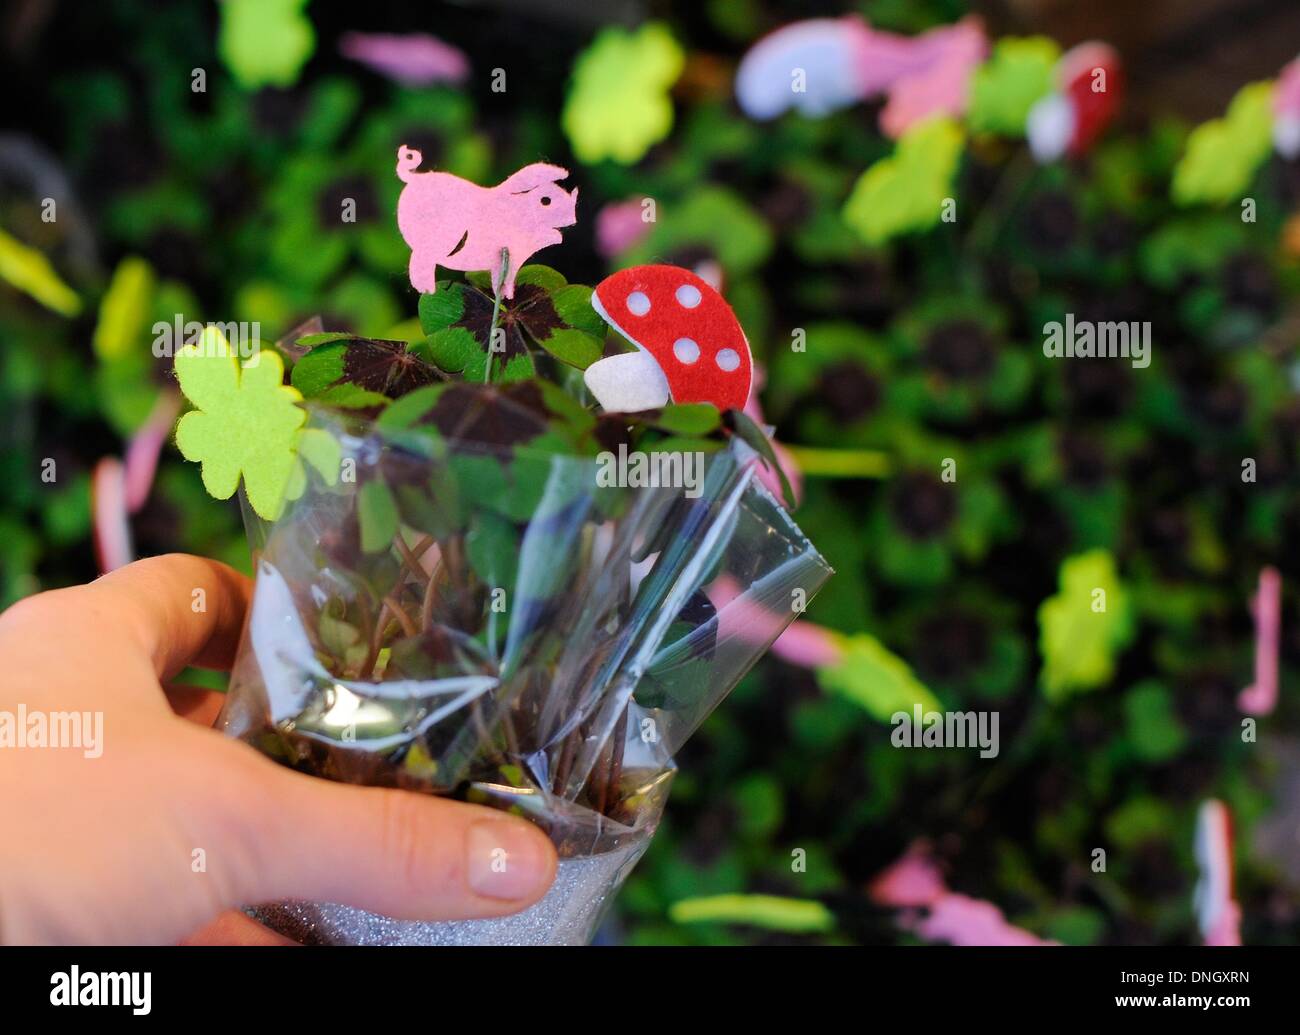 Hamburg, Germany. 29th Dec, 2013. A woman holds a flower pot with lucky charms in a flower shop in Hamburg, Germany, 29 December 2013. Chimney sweep, lucky pig, horseshoe or a four leaf clover are considered the lucky charms for the new year. Photo: Angelika Warmuth/dpa/Alamy Live News Stock Photo